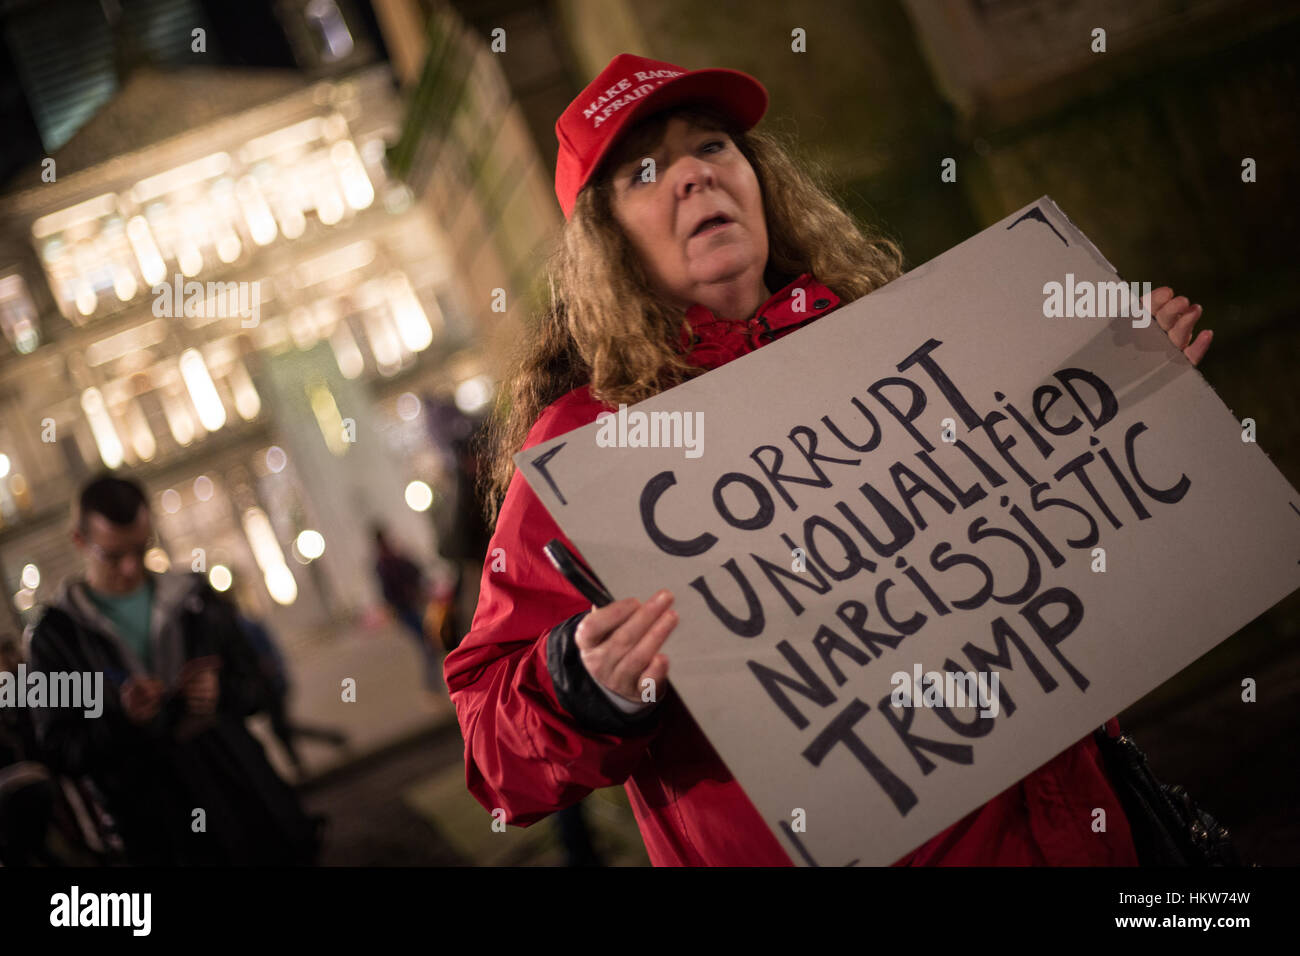 Glasgow, UK. 30th Jan, 2017. Protest against the policies and Presidency of Donald Trump, President of the United States of America, in George Square, Glasgow, Scotland, on 30 January 2017. Credit: jeremy sutton-hibbert/Alamy Live News Stock Photo